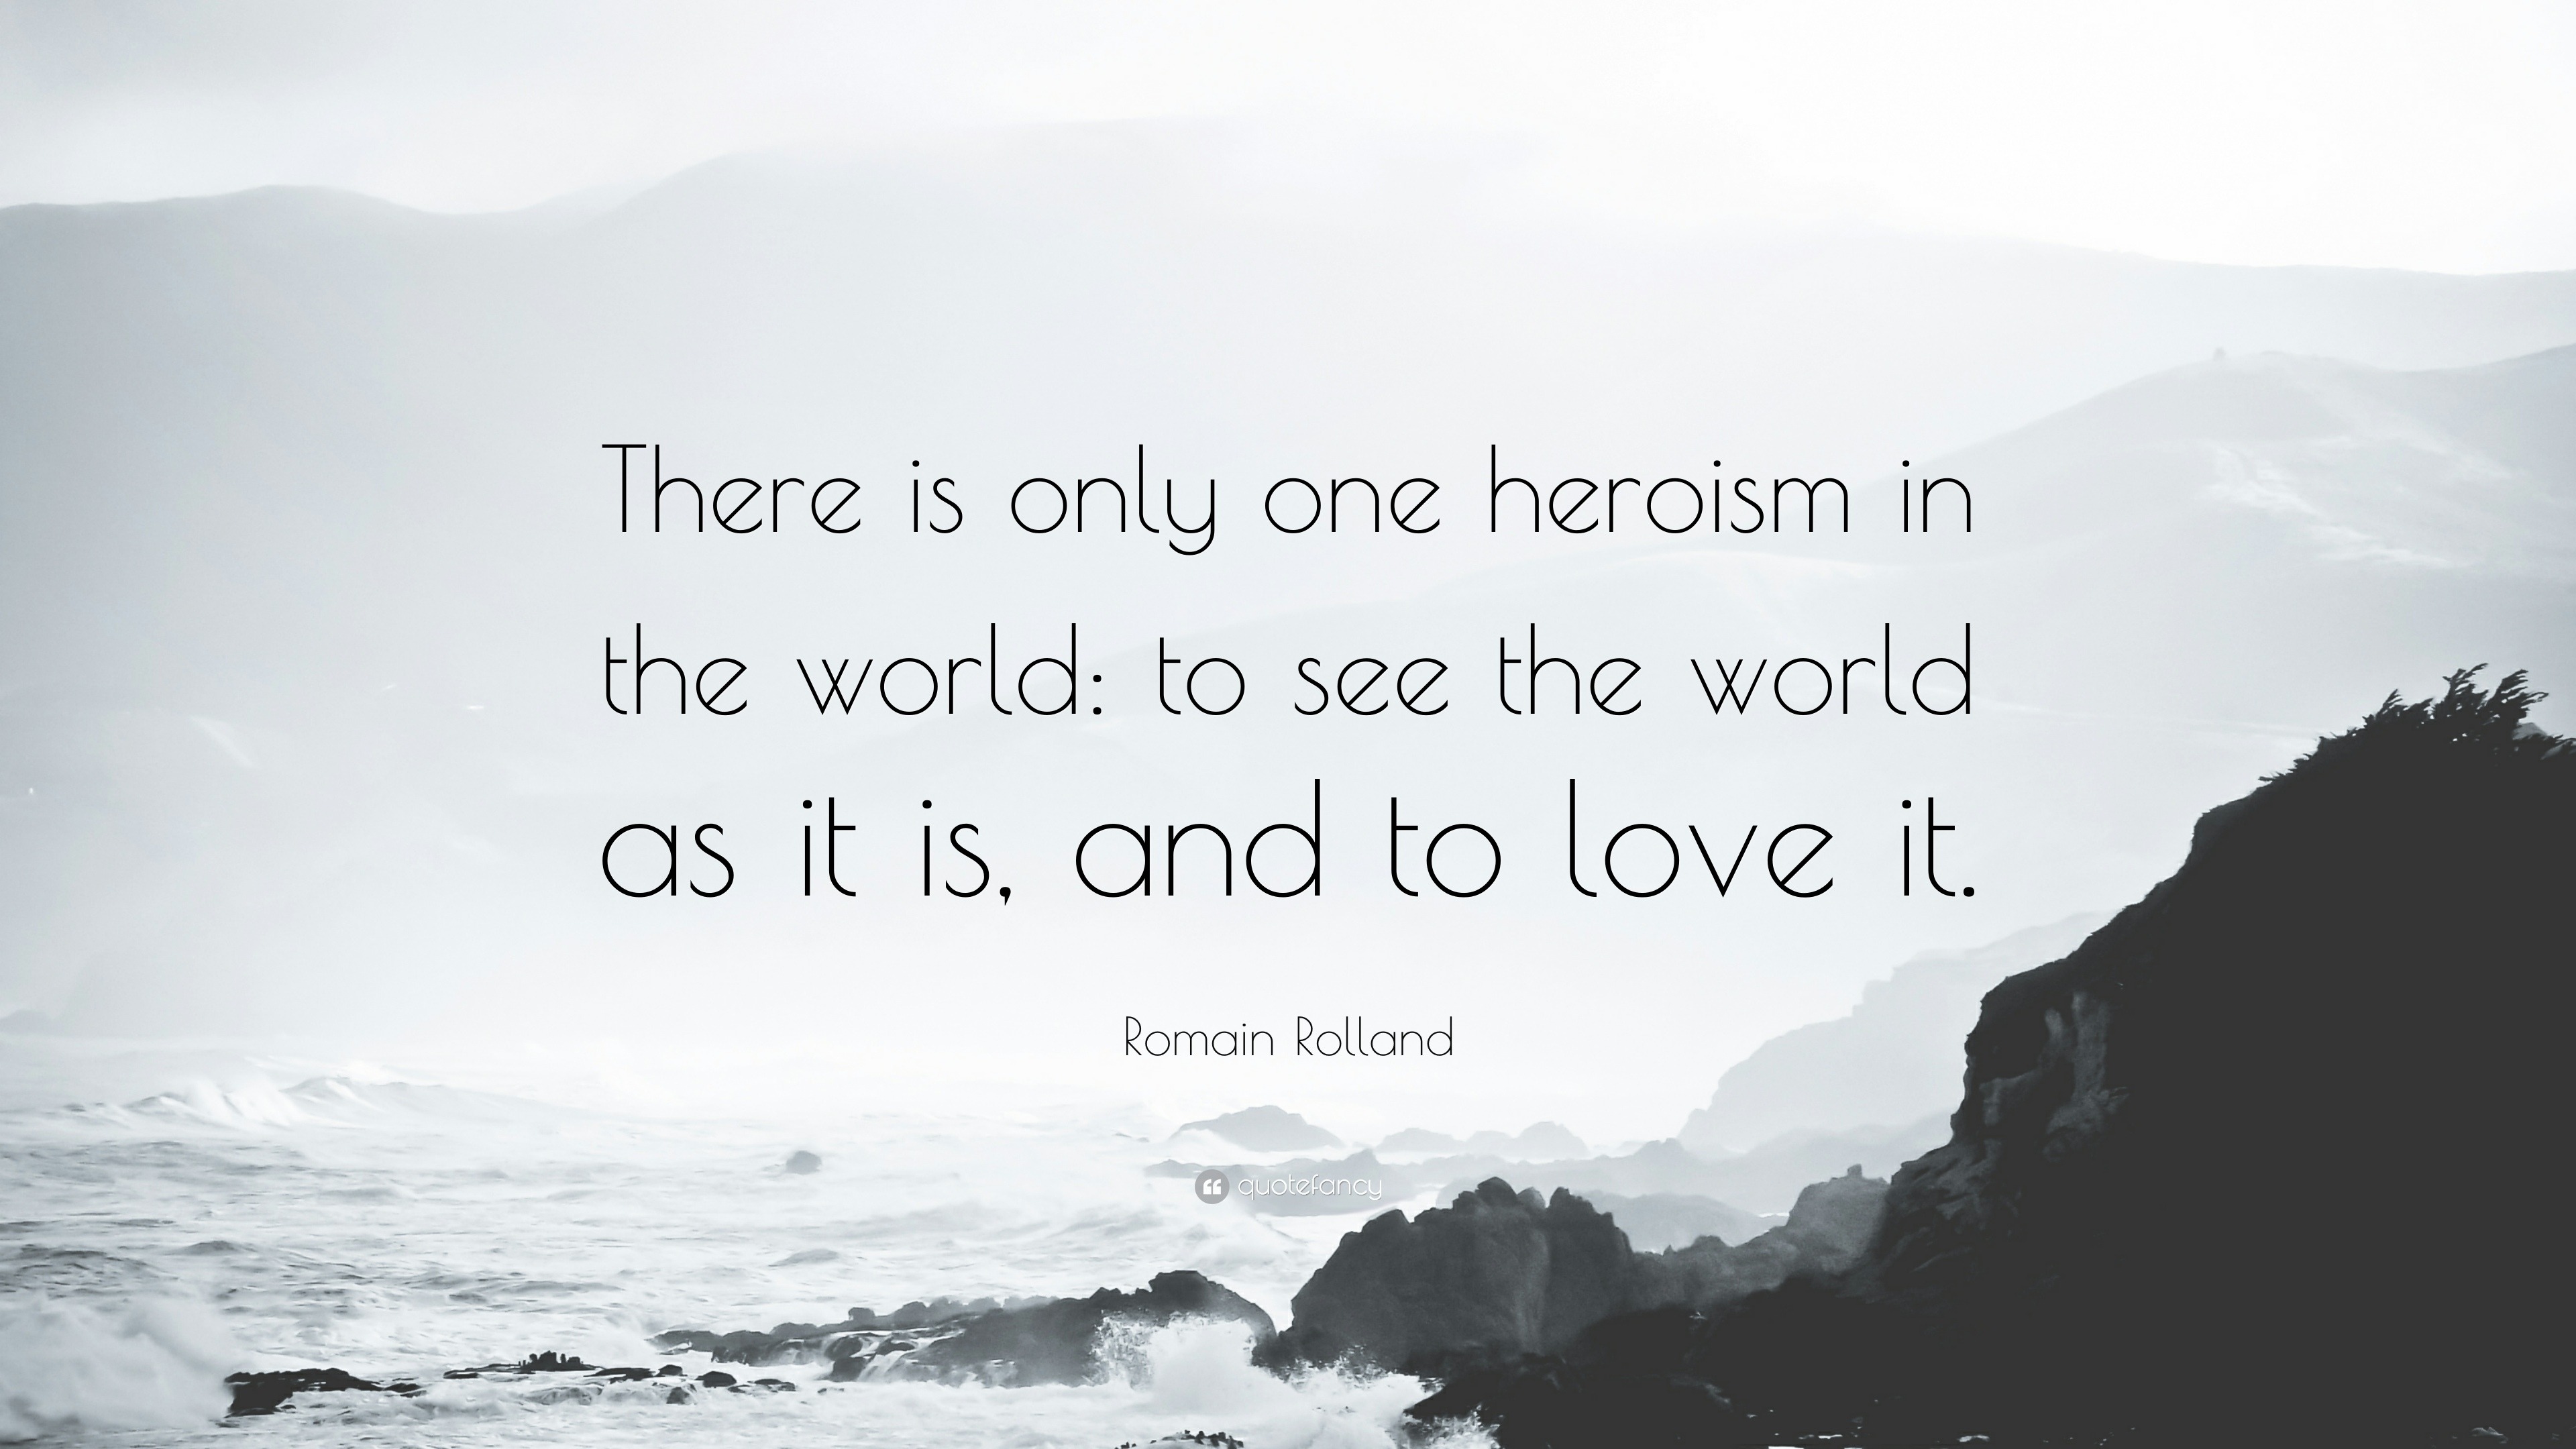 https://quotefancy.com/media/wallpaper/3840x2160/1074742-Romain-Rolland-Quote-There-is-only-one-heroism-in-the-world-to-see.jpg